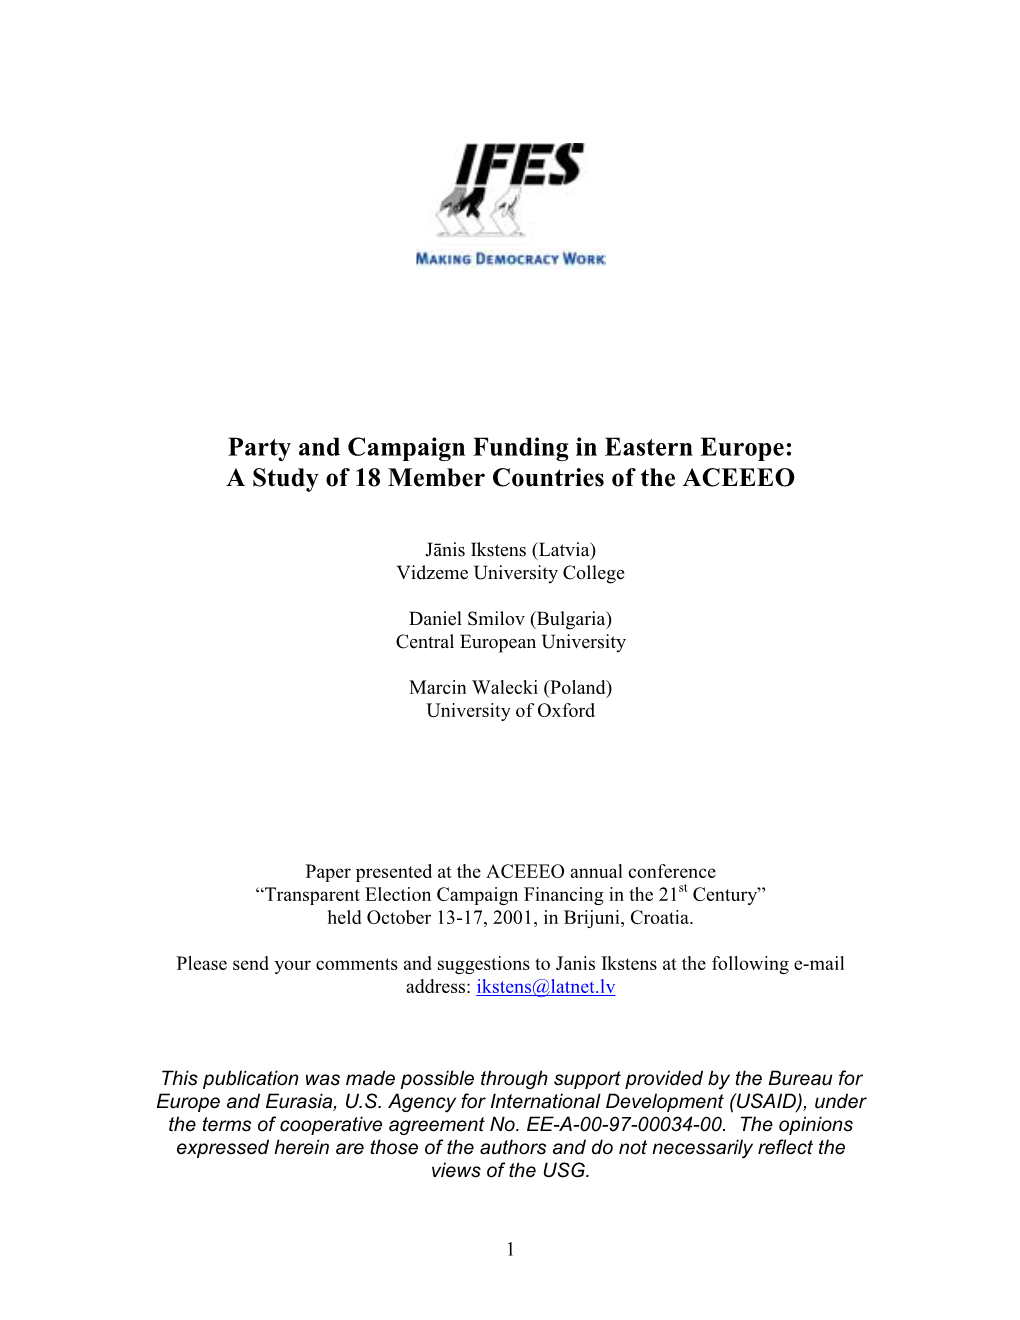 Party and Campaign Funding in Eastern Europe: a Study of 18 Member Countries of the ACEEEO